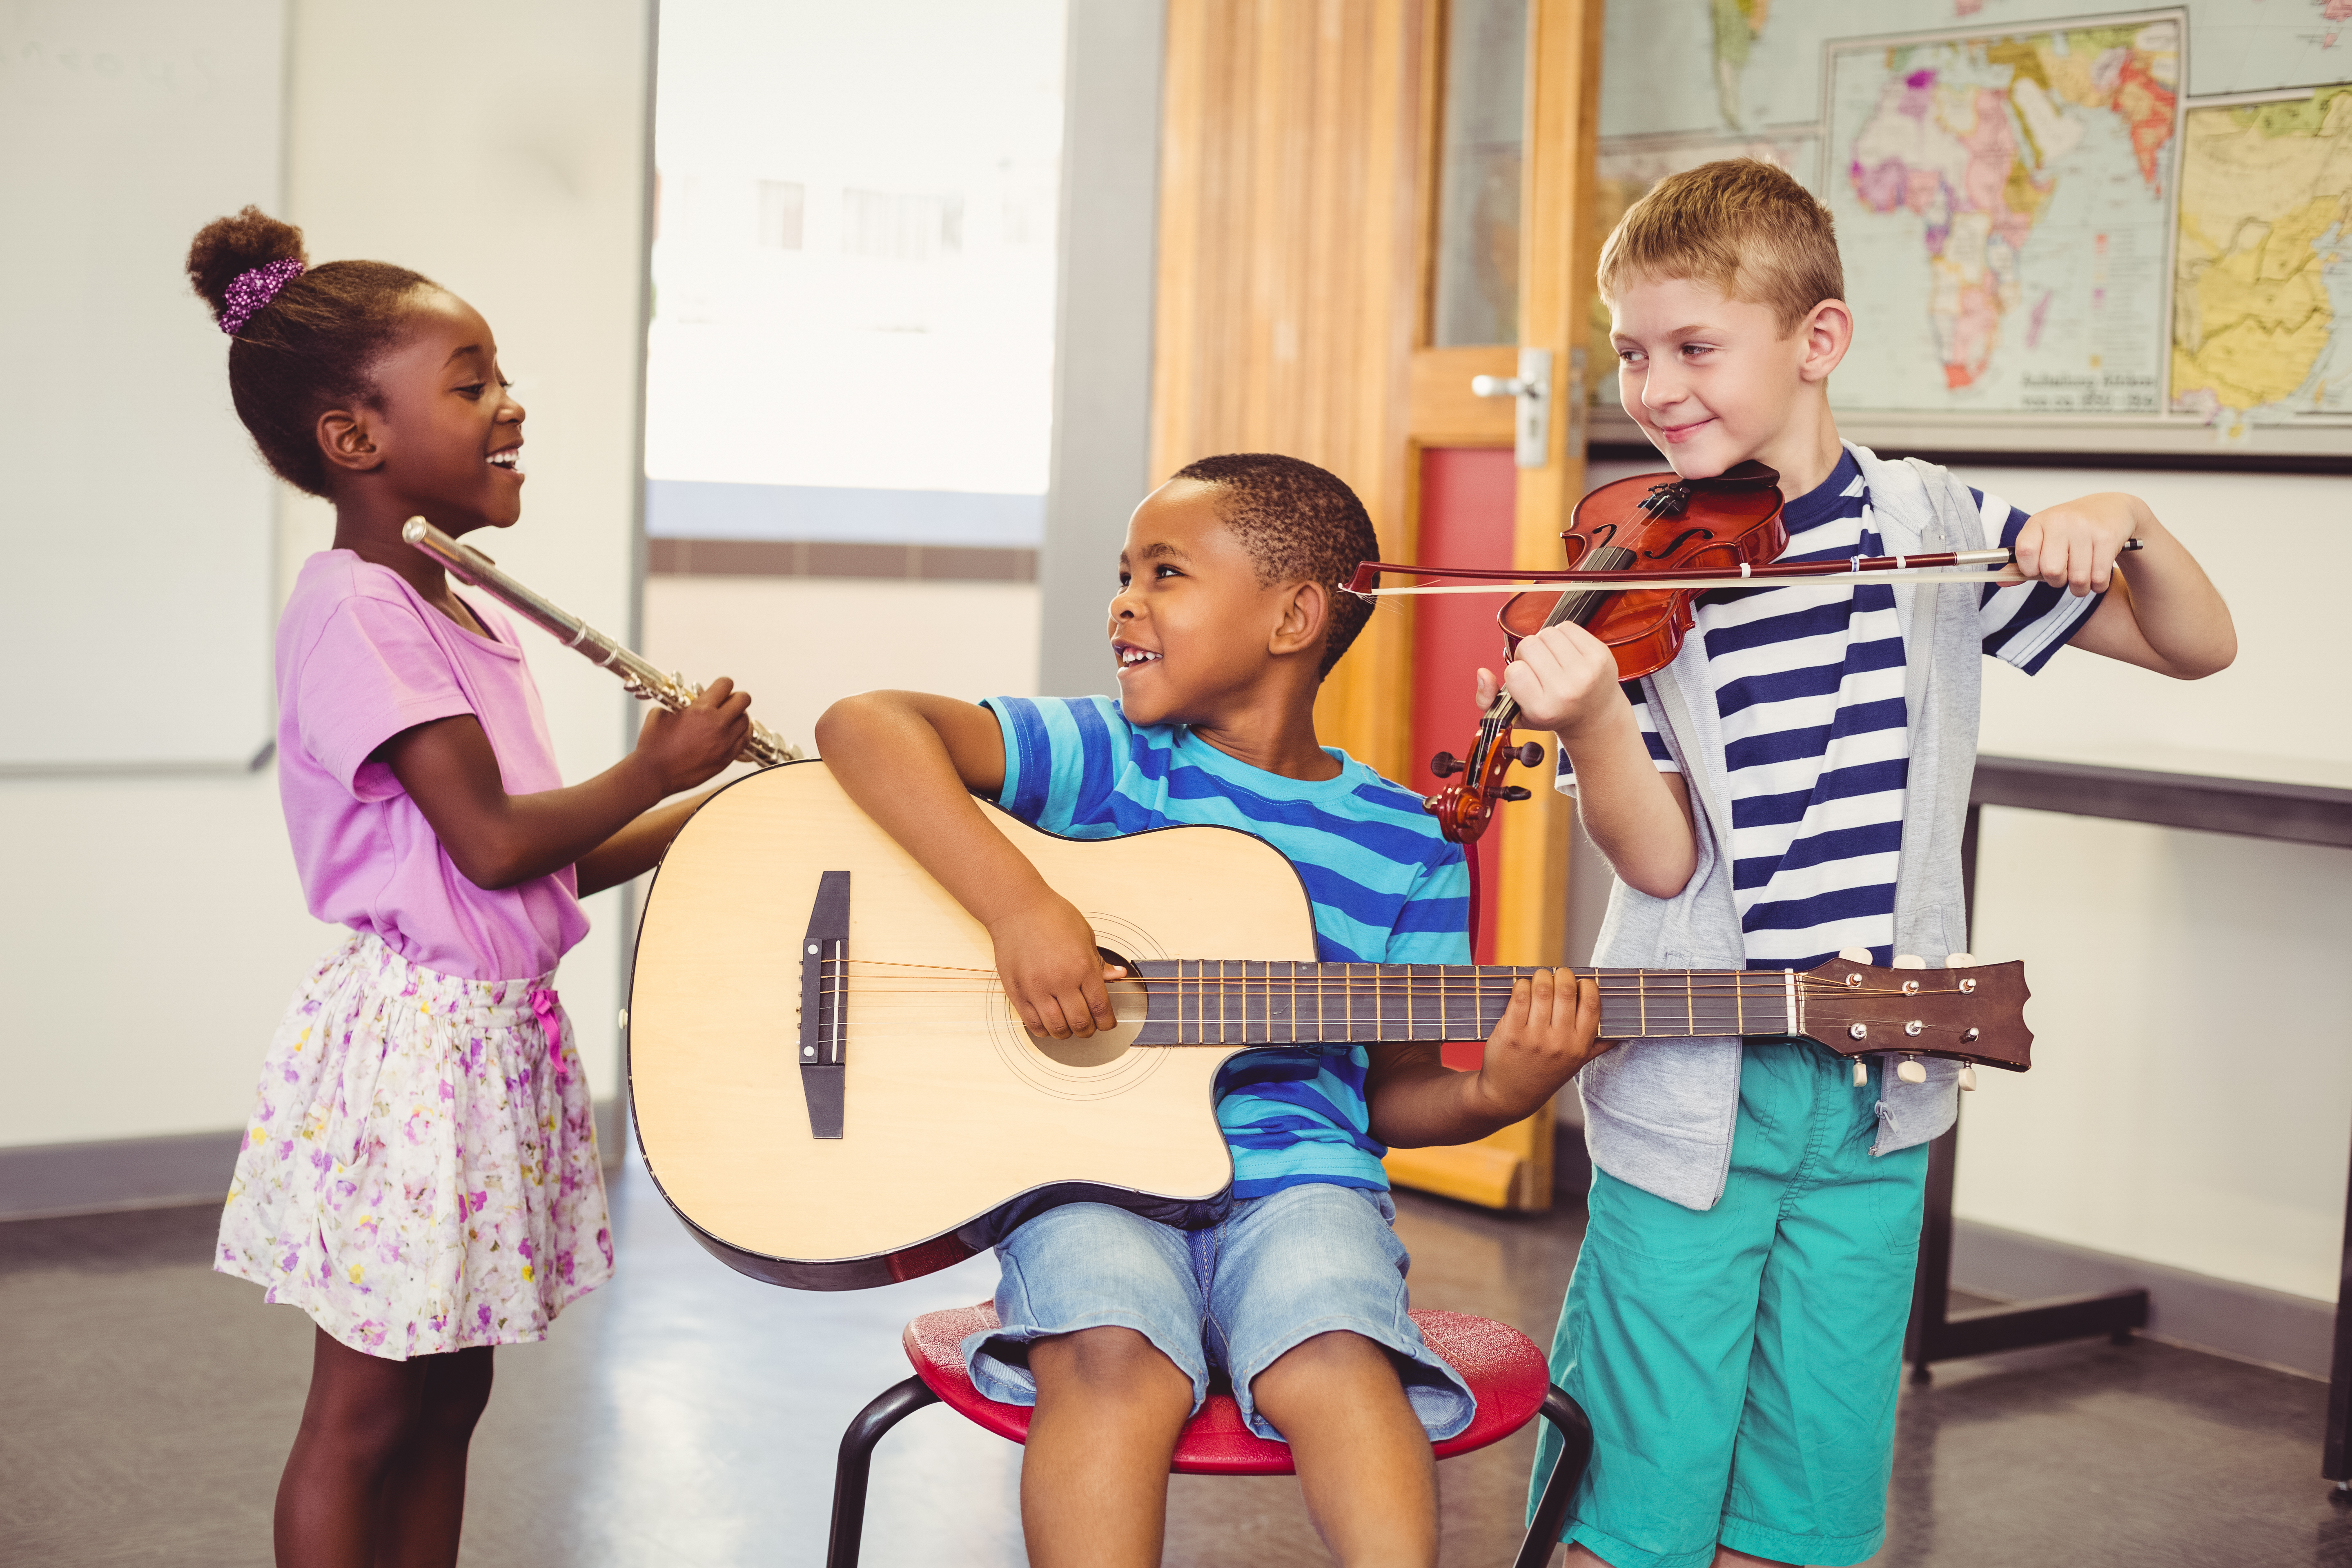 Three kids each holding different musical instruments